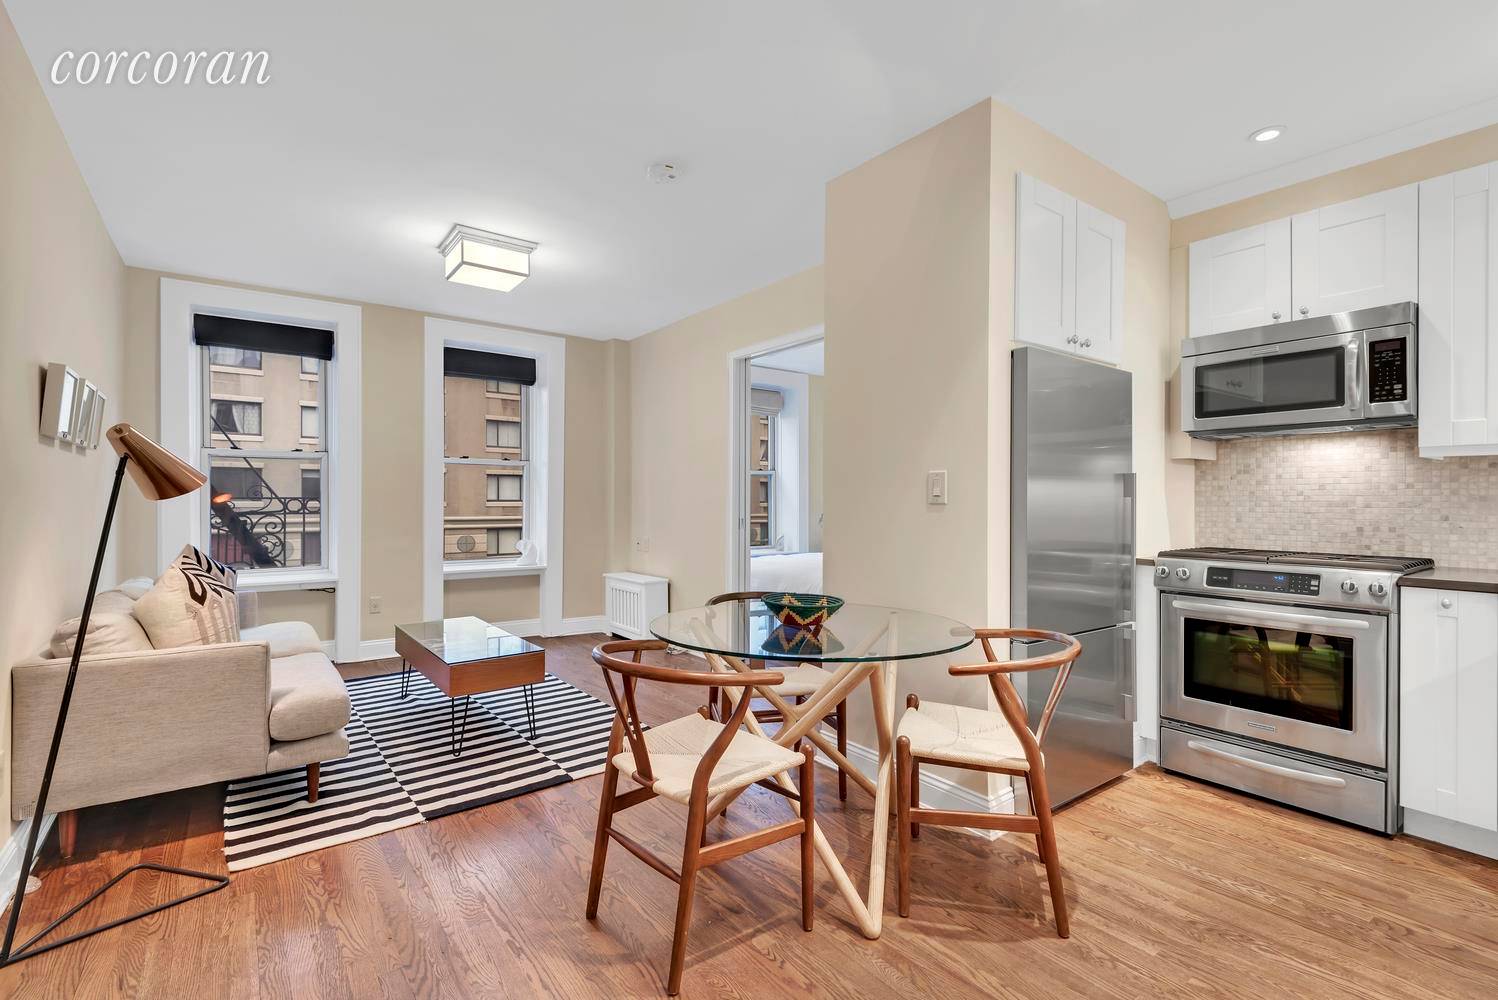 Welcome to 328 West 96th Street 3D Located on the Upper West Side this immaculate fully renovated home features 2 bedrooms, and 2 full baths, and is located right across ...